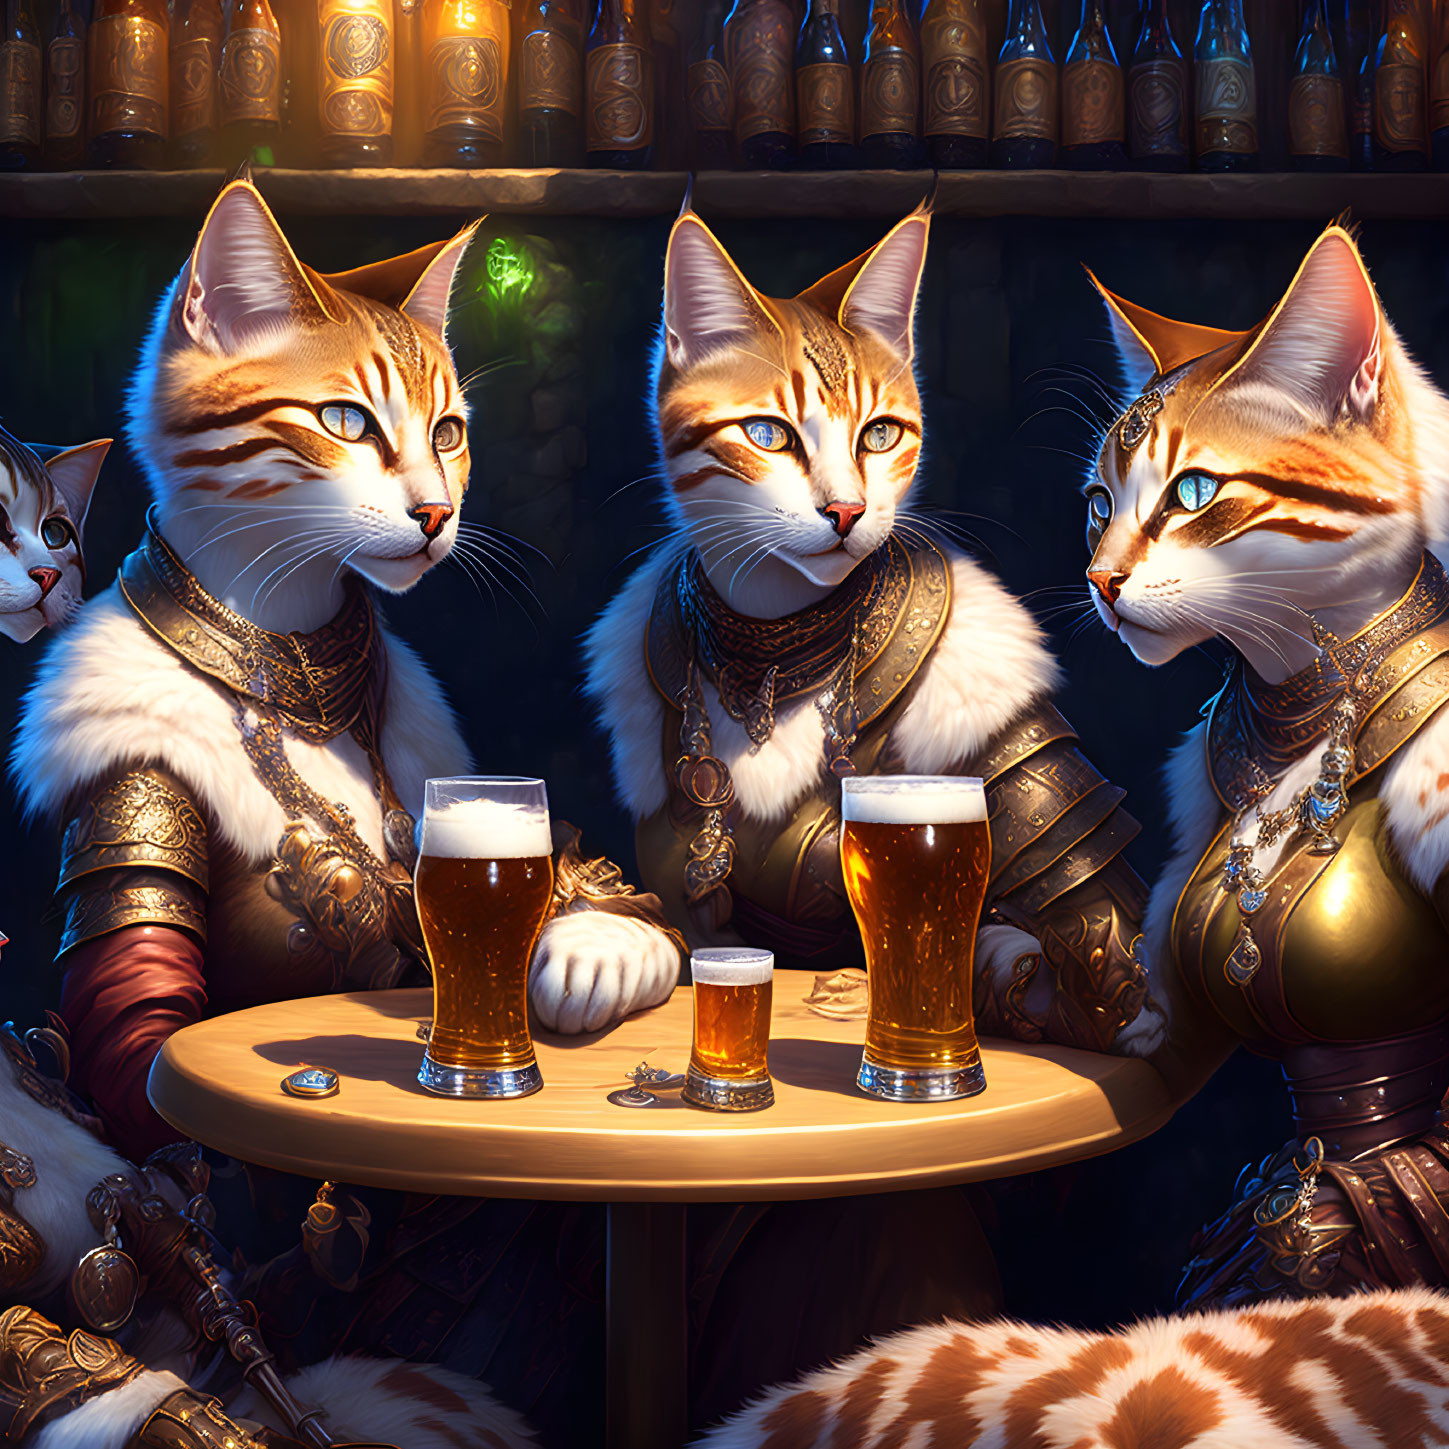 Four anthropomorphic cats in medieval armor drinking beer in tavern setting